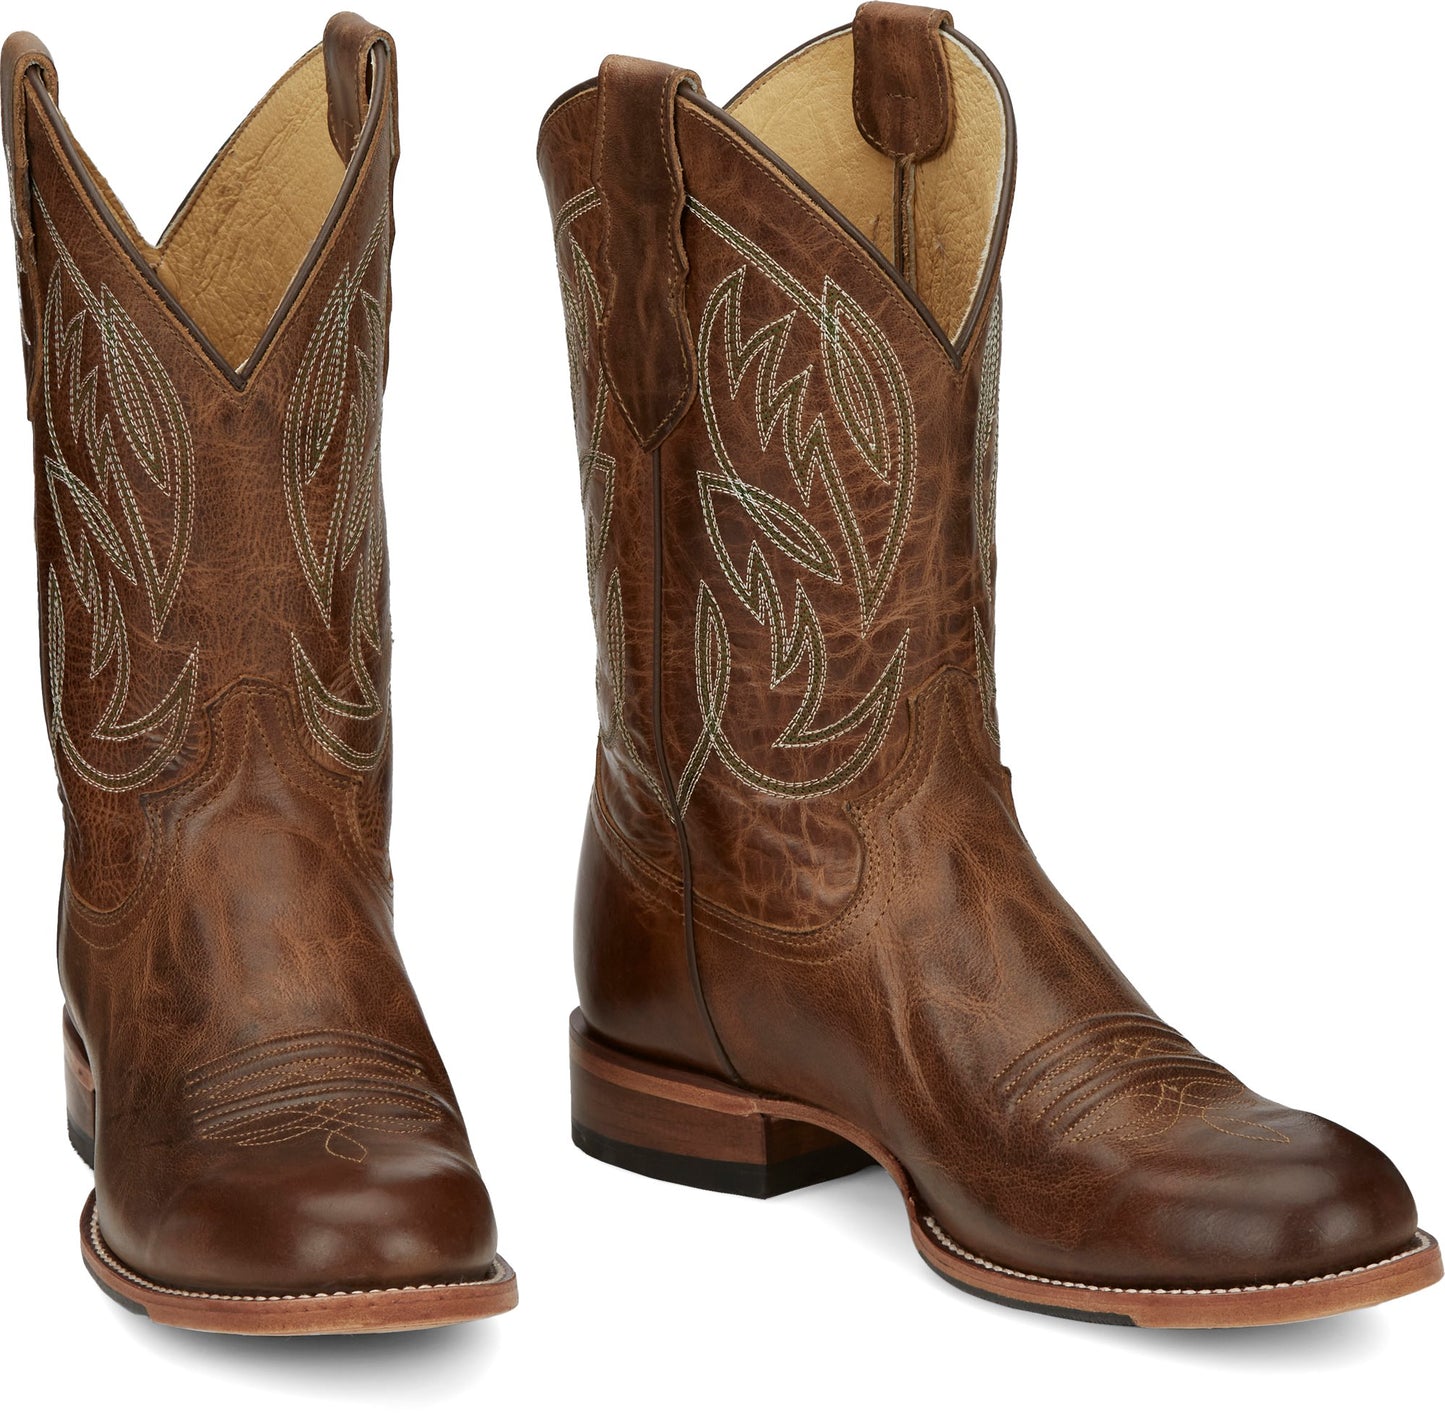 Justin® Men's Pearsall Round Toe Roper Cowboy Boots